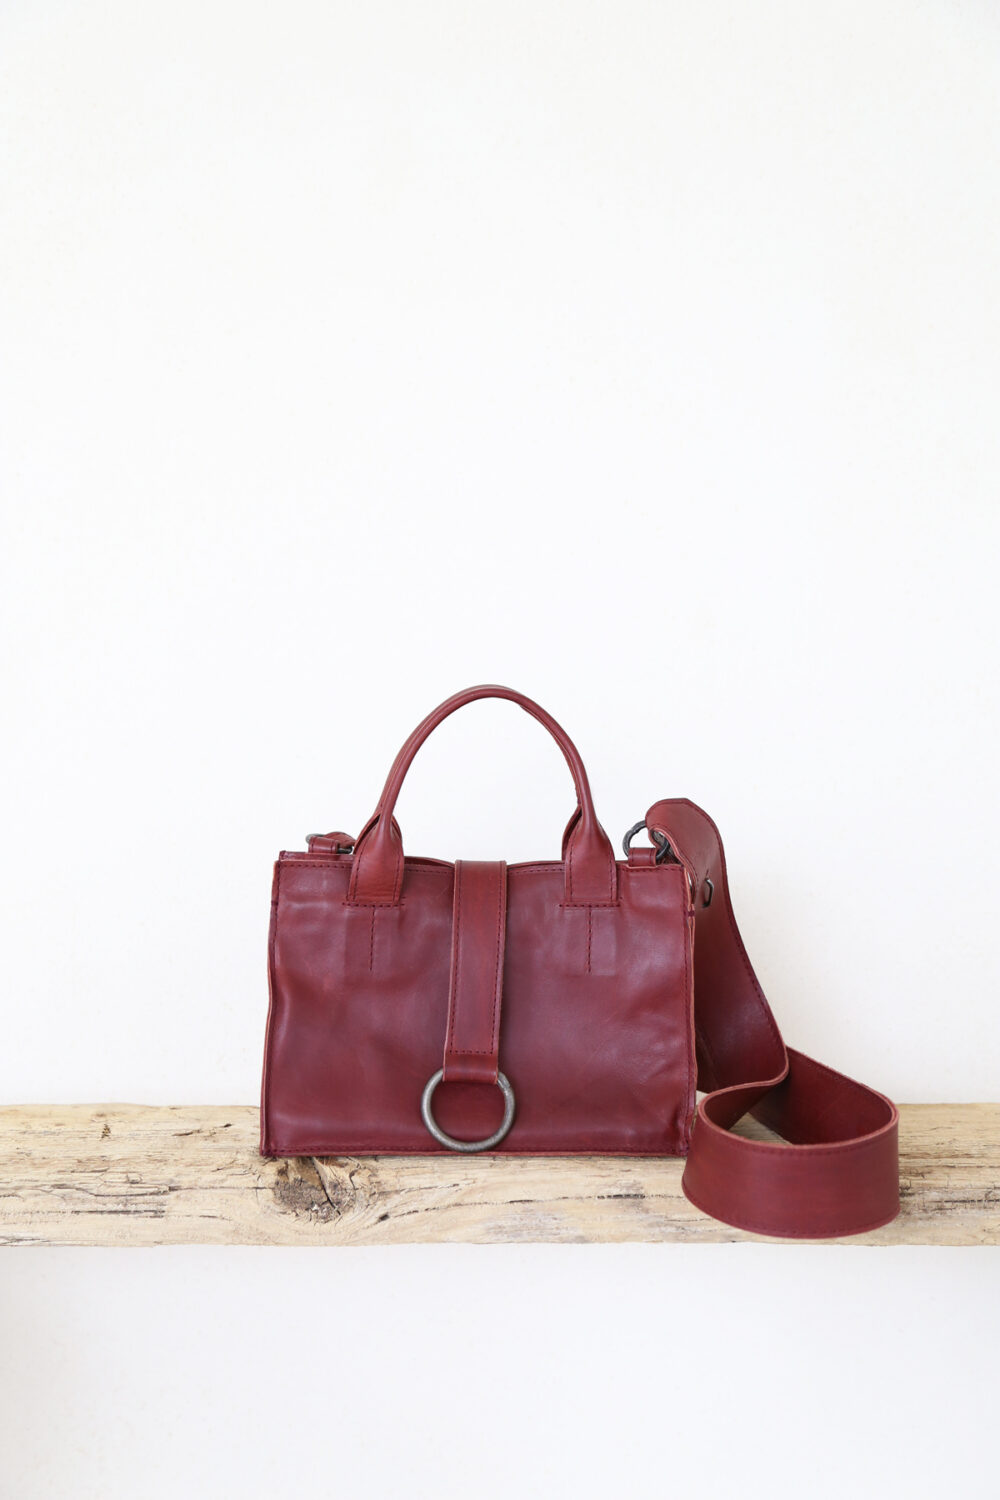 Aged Bags Archivi - Tagliovivo | Artisanal Leather Bags